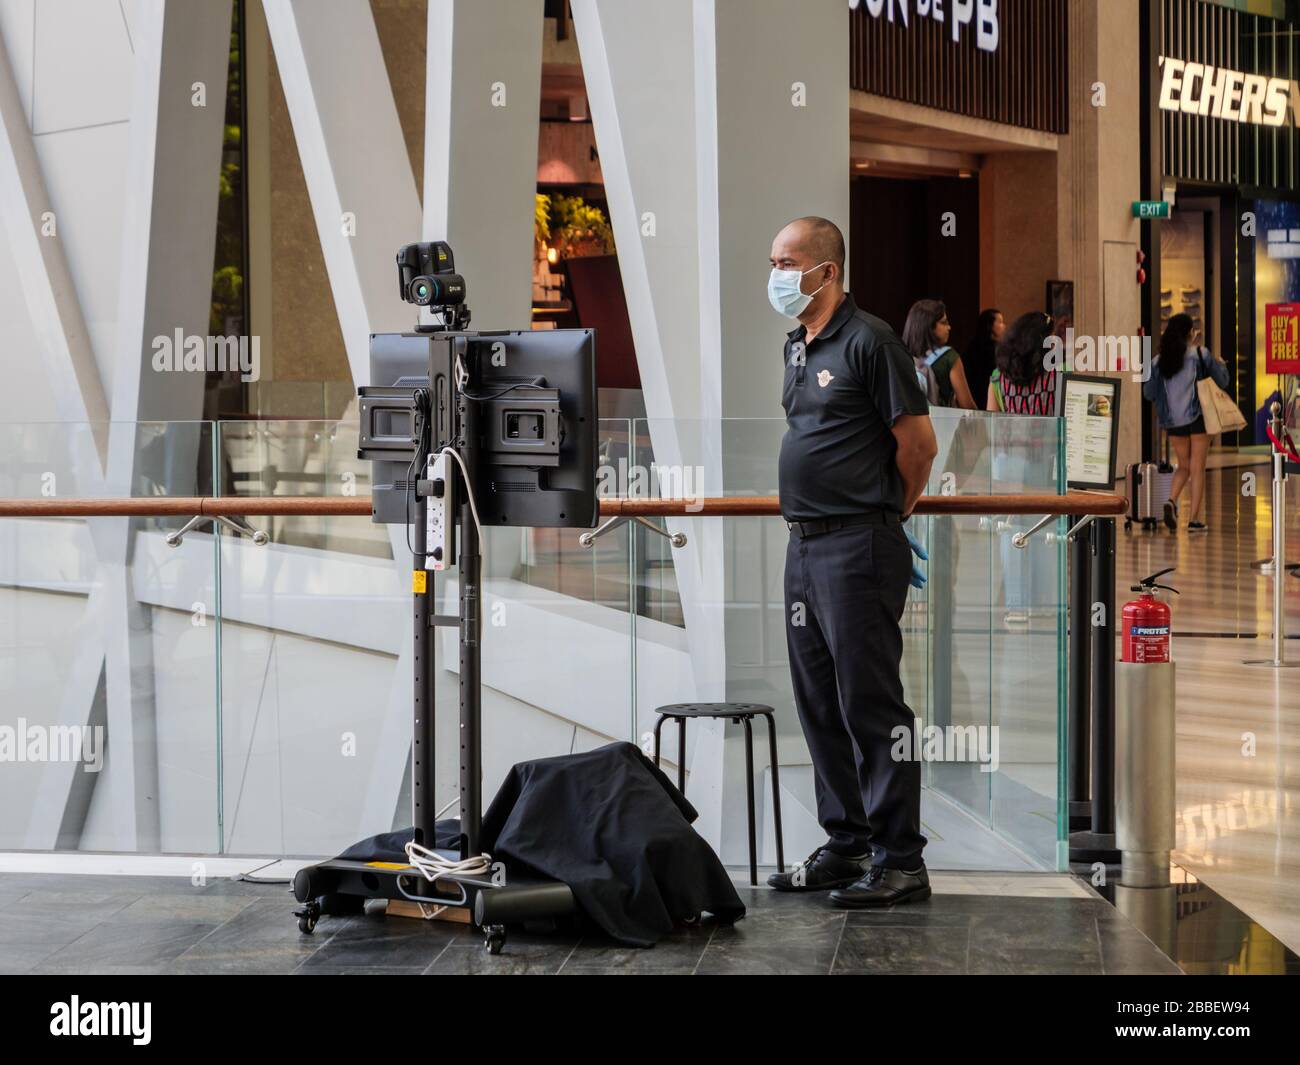 SINGAPORE – 23 MAR 2020 – Security guard wearing a mask operates a FLIR thermal imaging temperature scanner / camera scanner at Jewel Mall, Changi Air Stock Photo